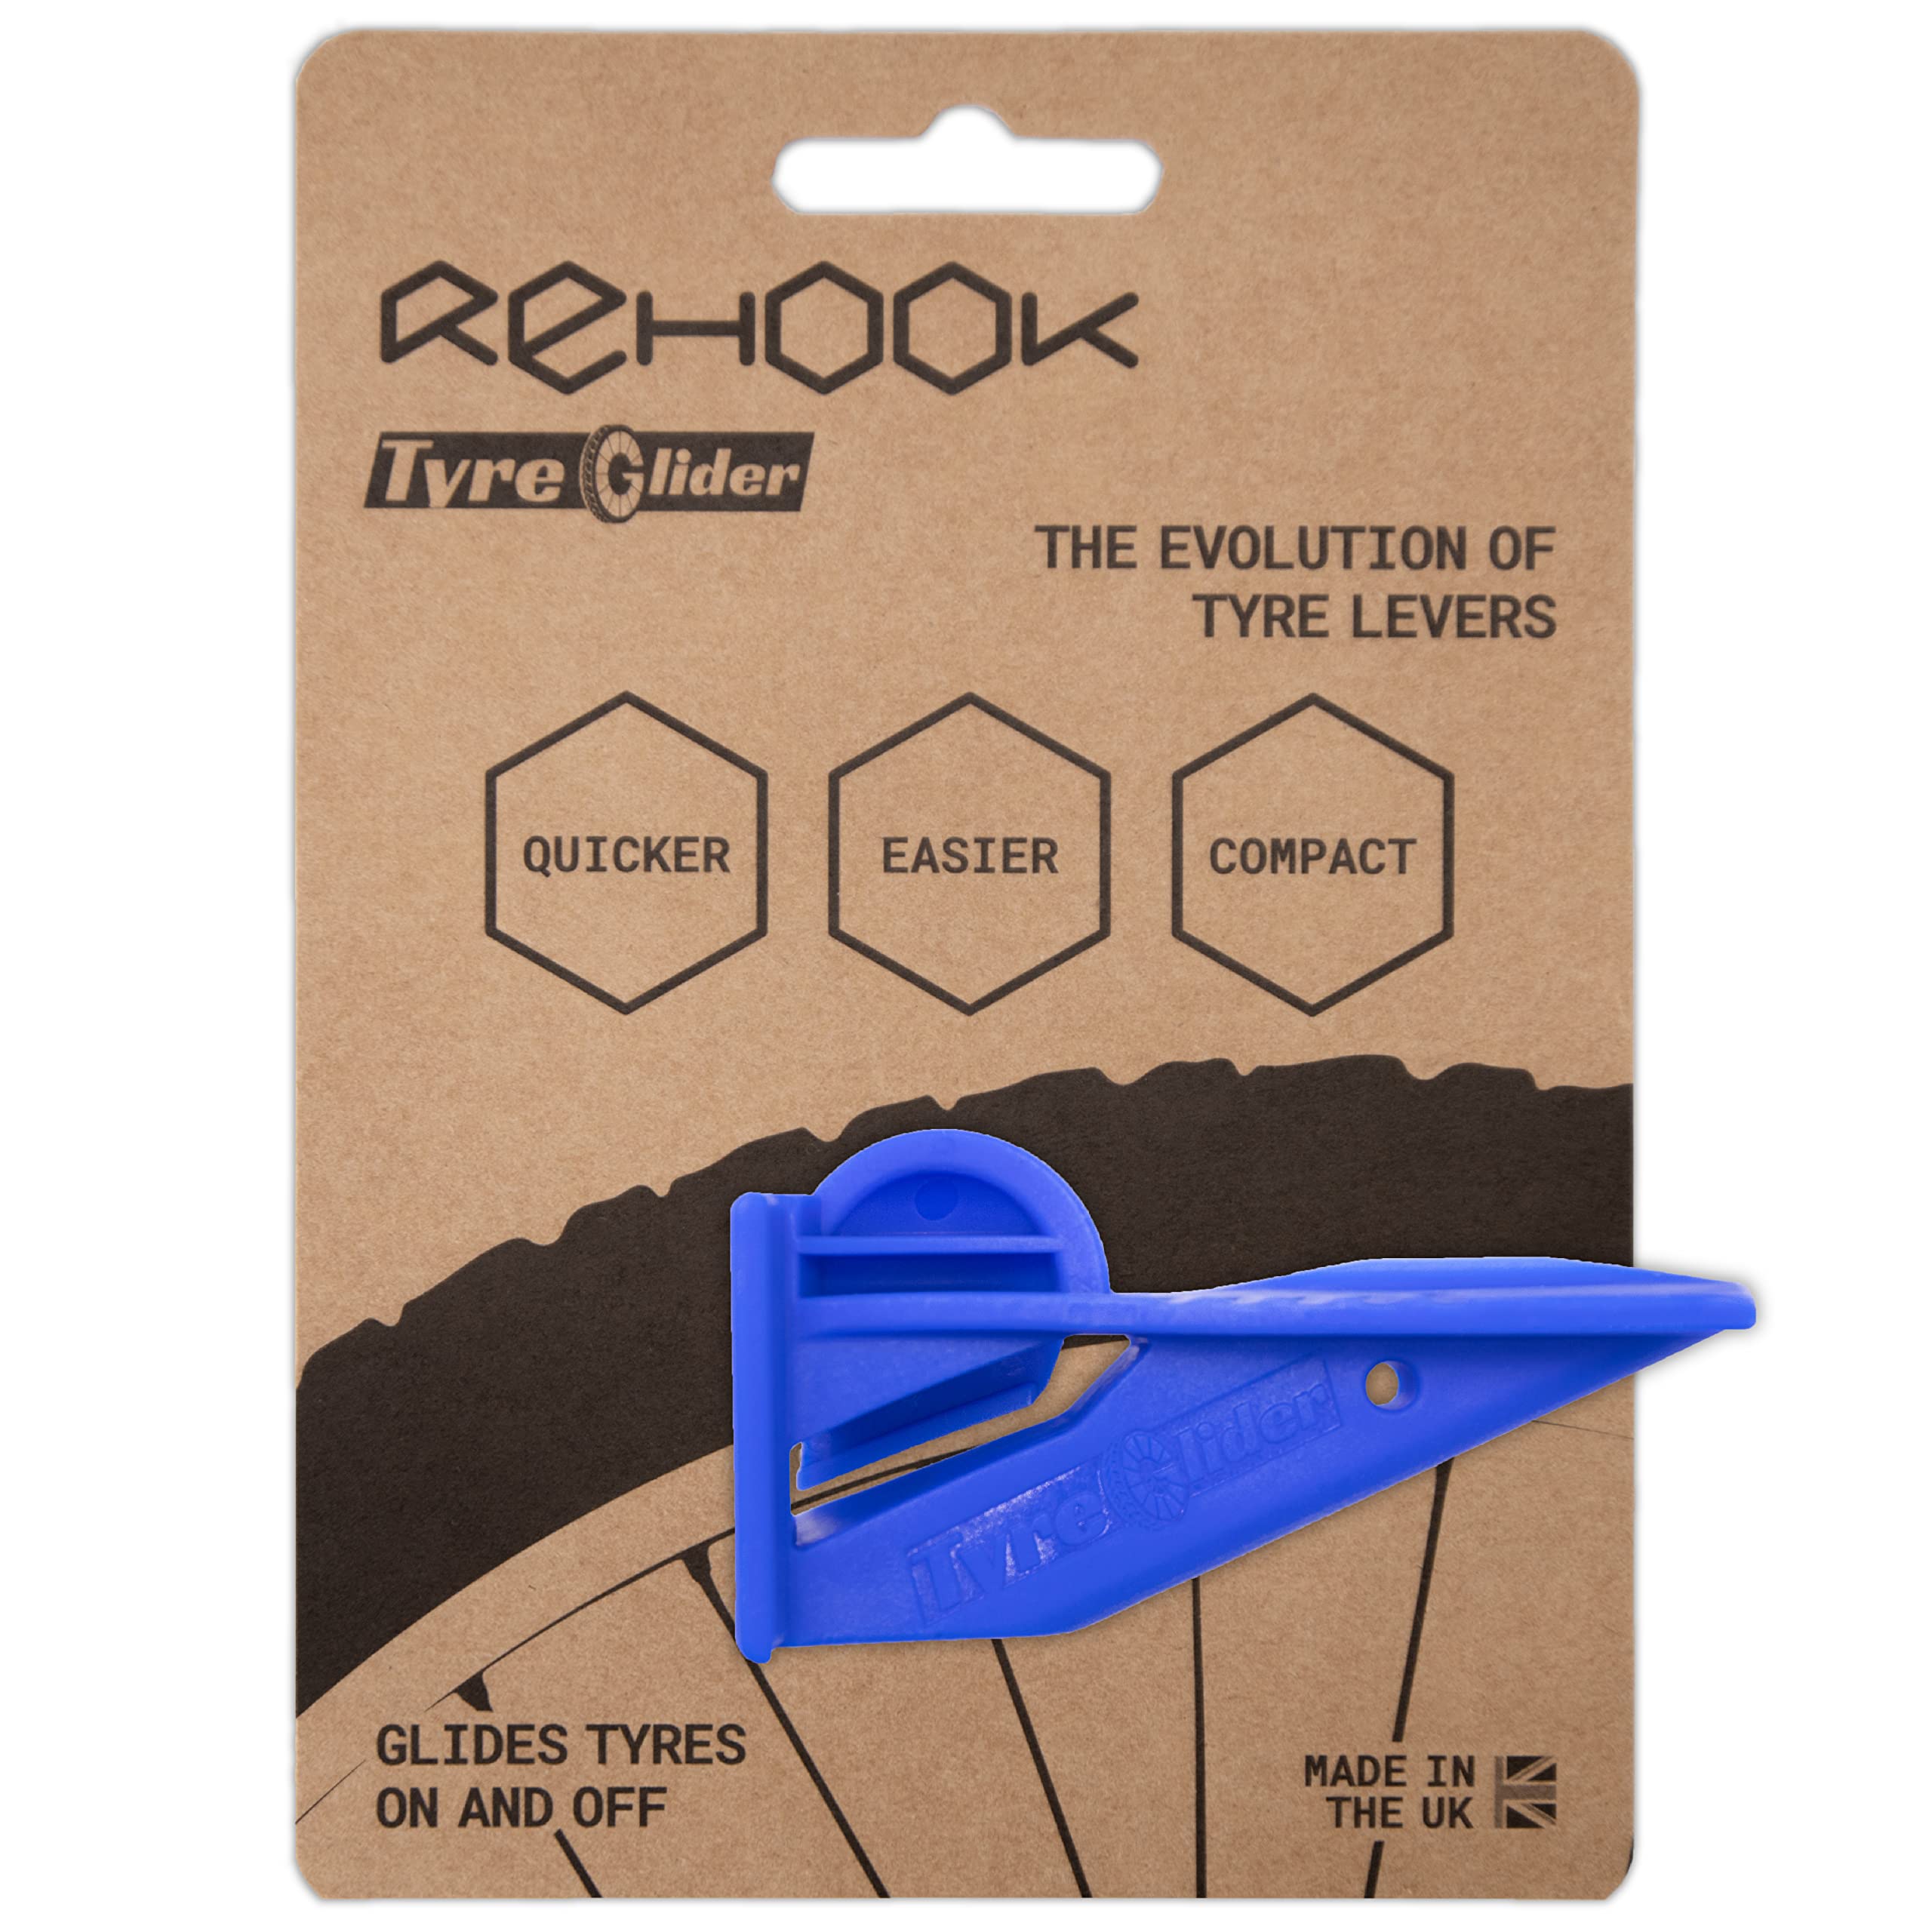 Rehook Tyre Glider - A Strong Portable Bicycle Tyre replacement and Bike  Tire Remover Tool - No more